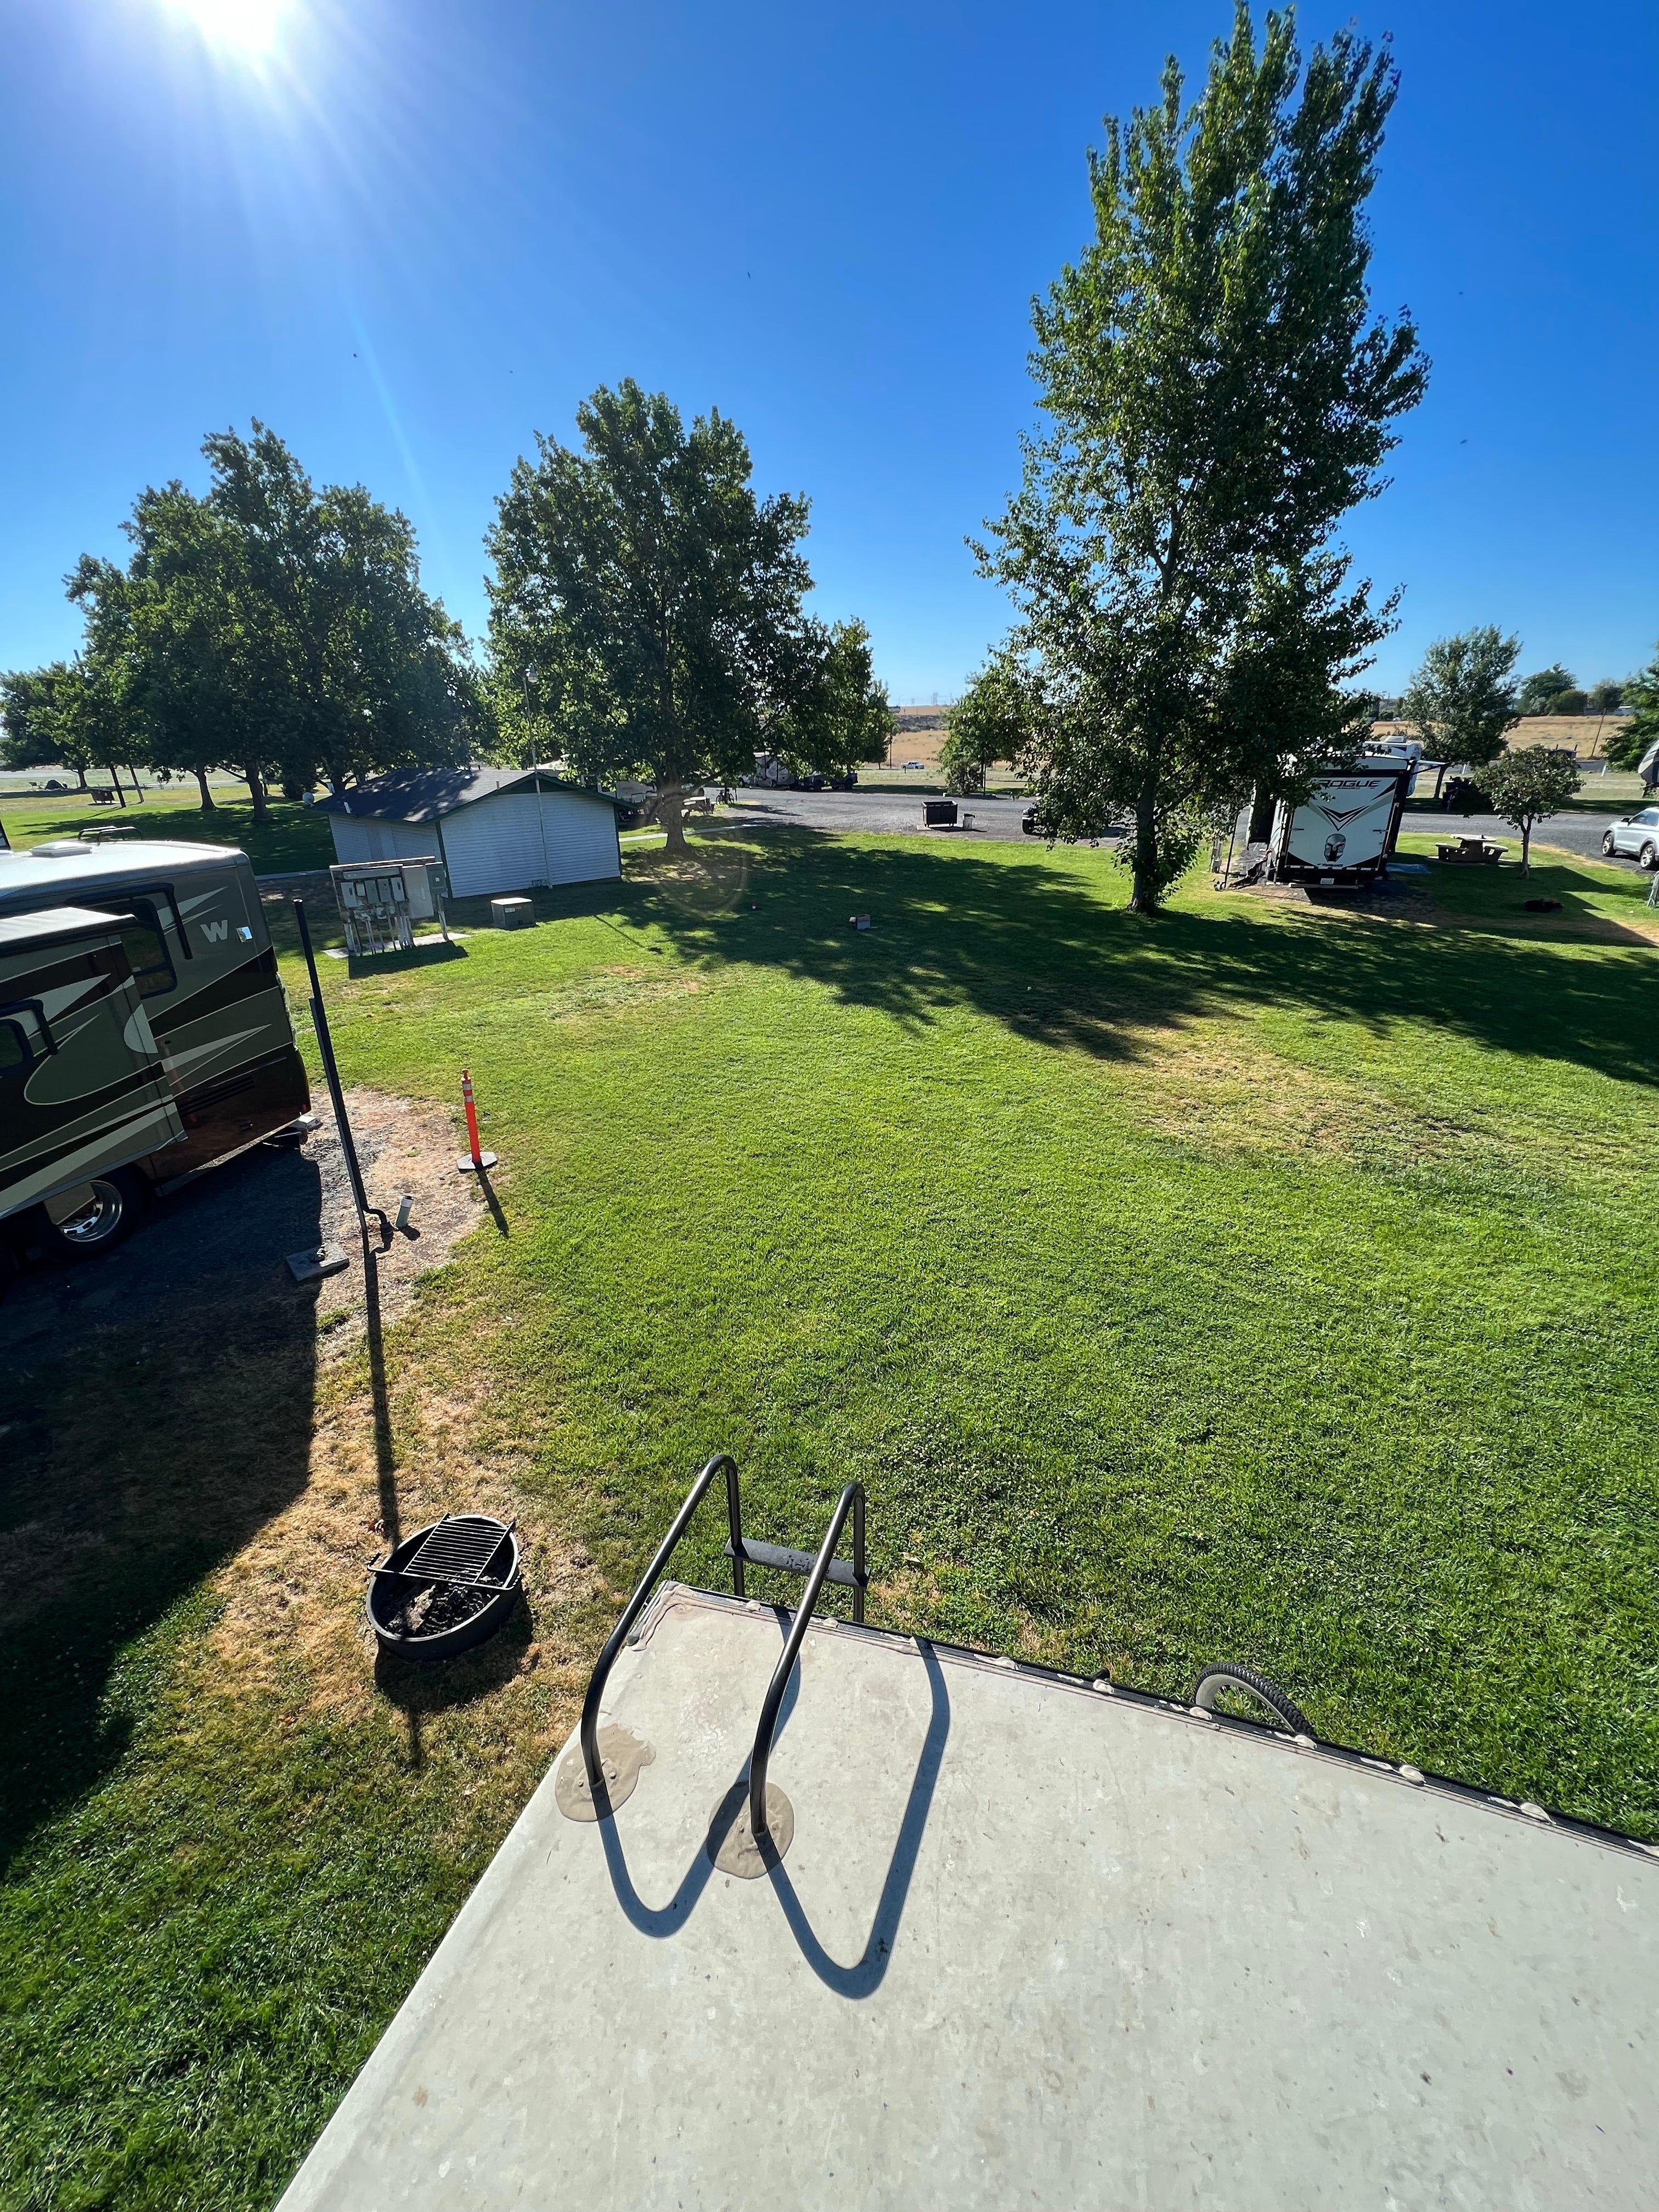 Camper submitted image from Umatilla Marina and RV ParkPublic - 1